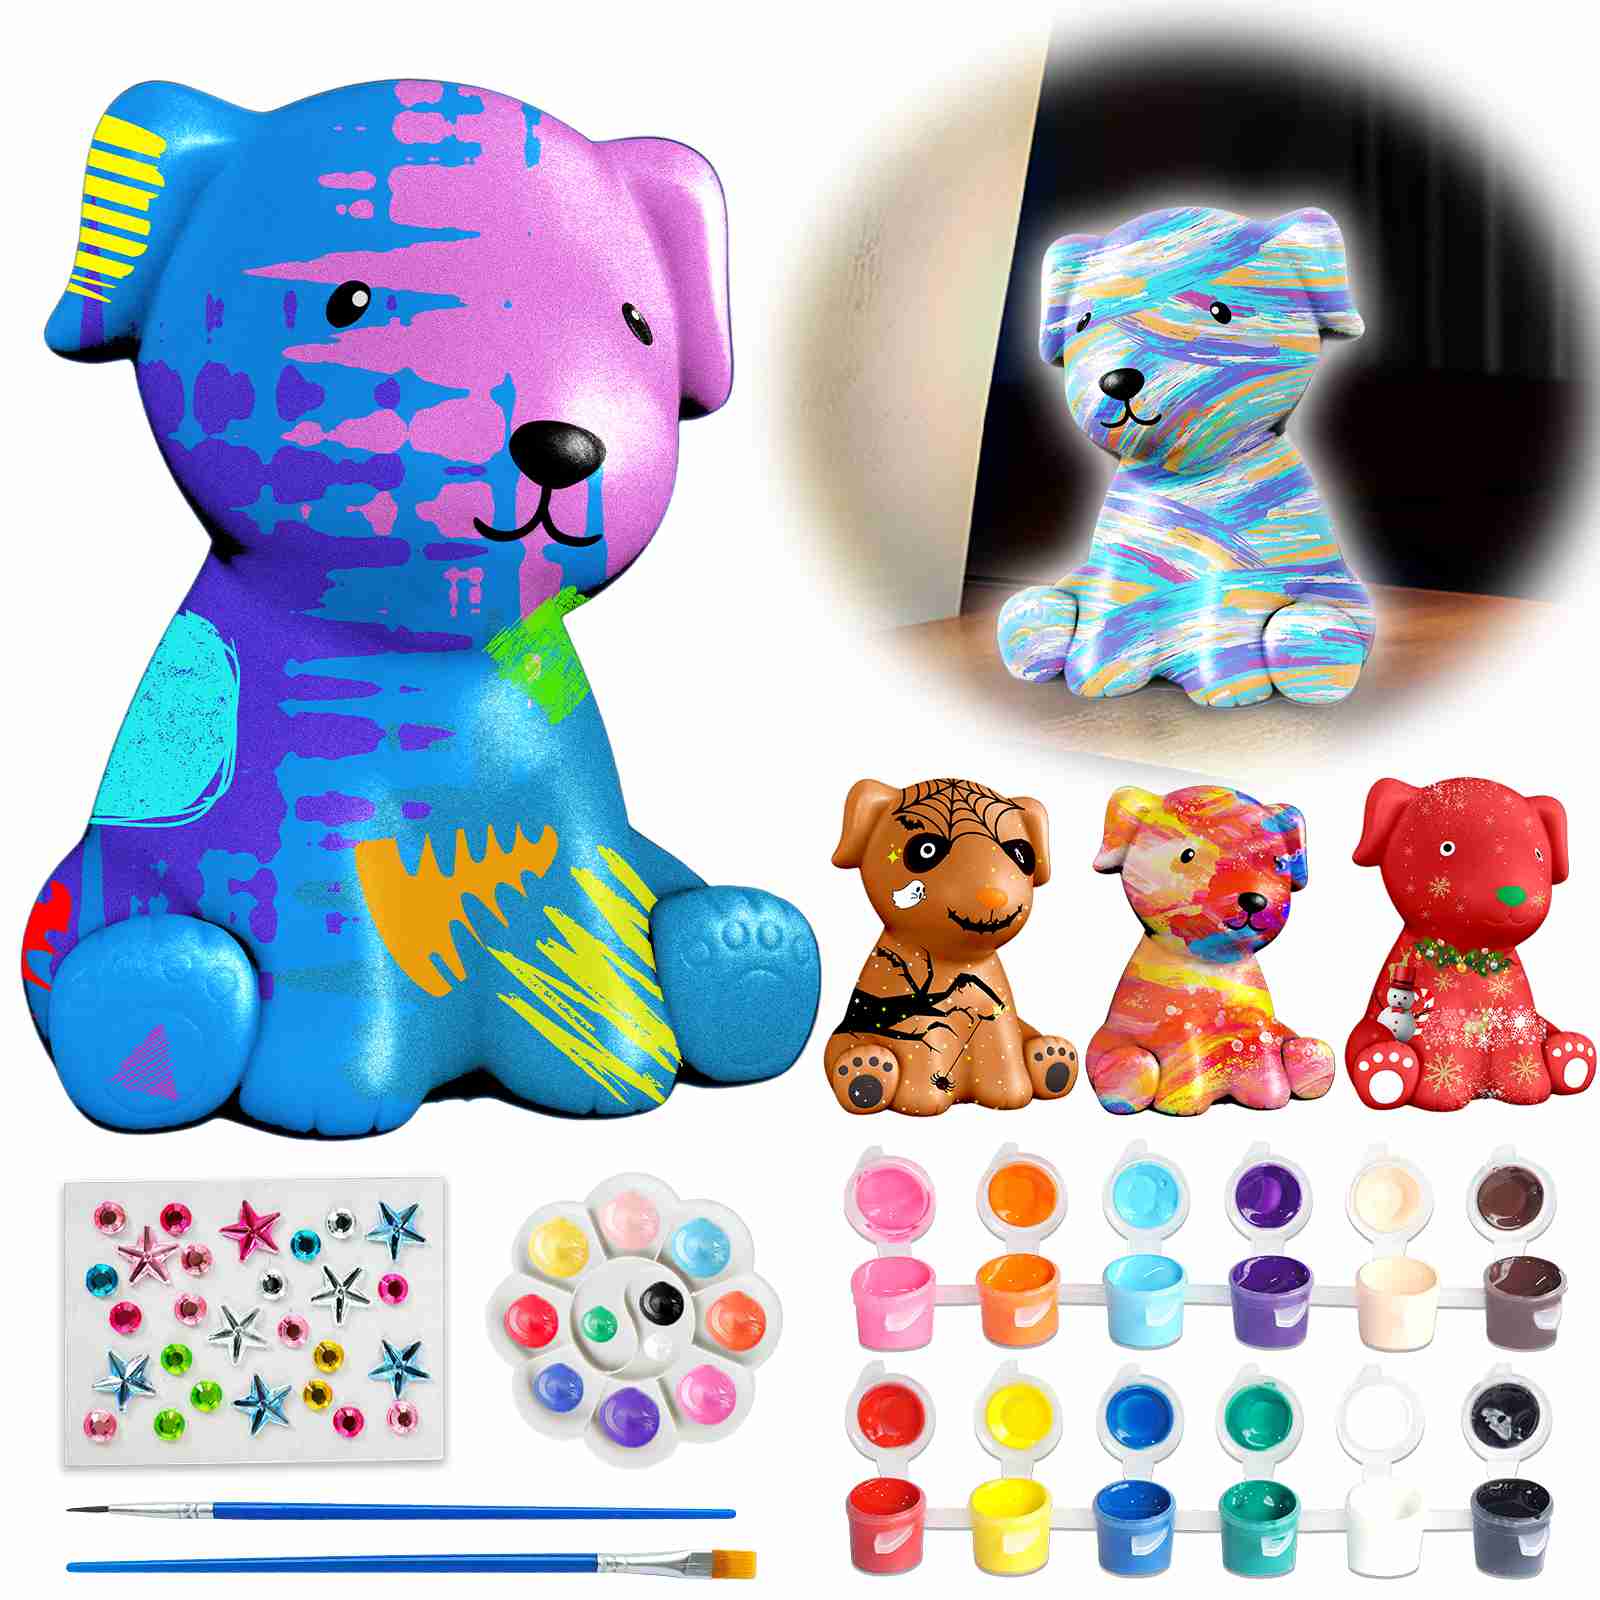 paint-your-own-dog-lamp-puppy-crafts-crafts-for-teens with cash back rebate